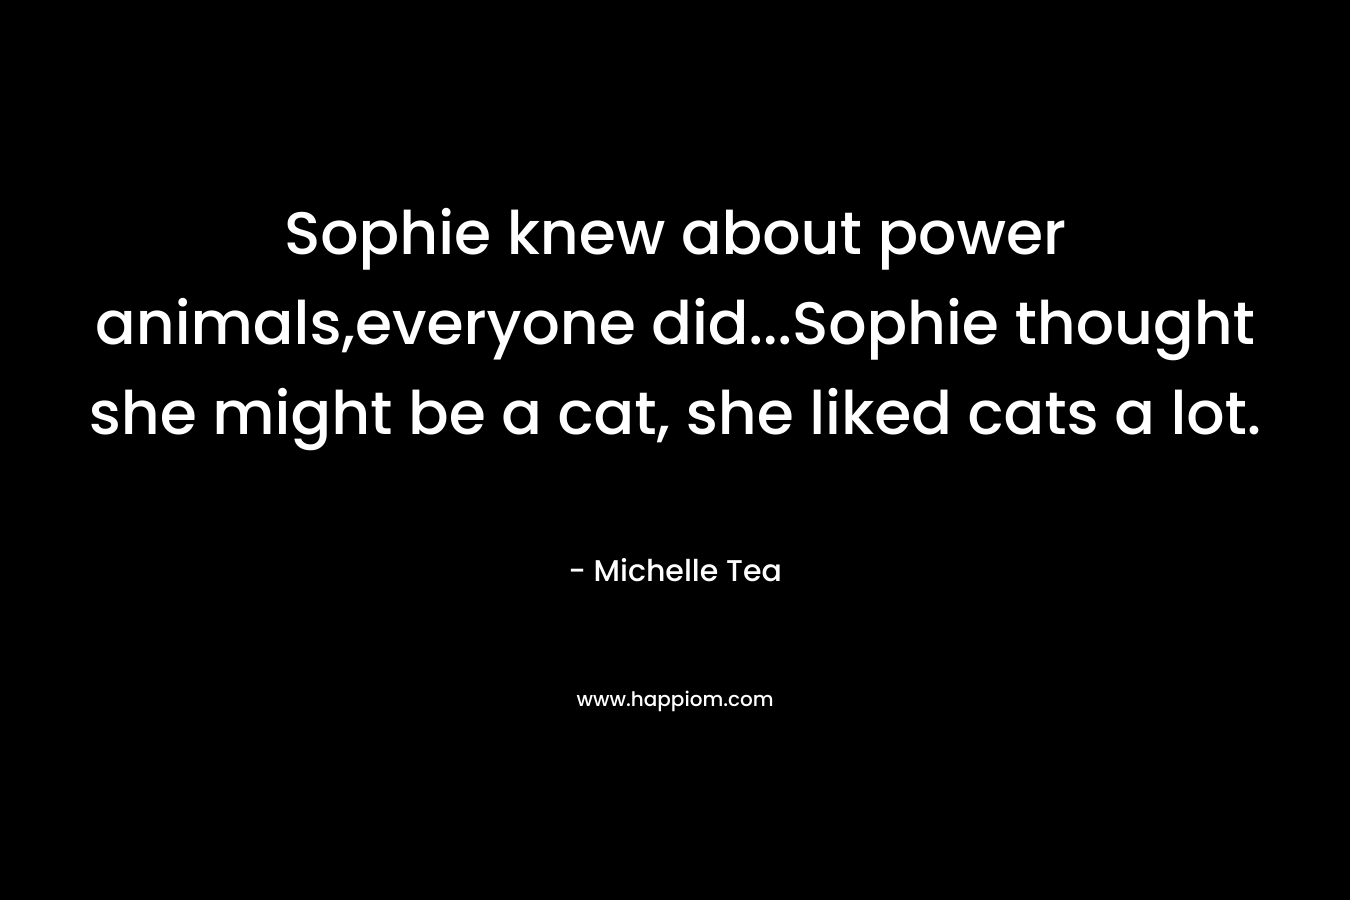 Sophie knew about power animals,everyone did...Sophie thought she might be a cat, she liked cats a lot.